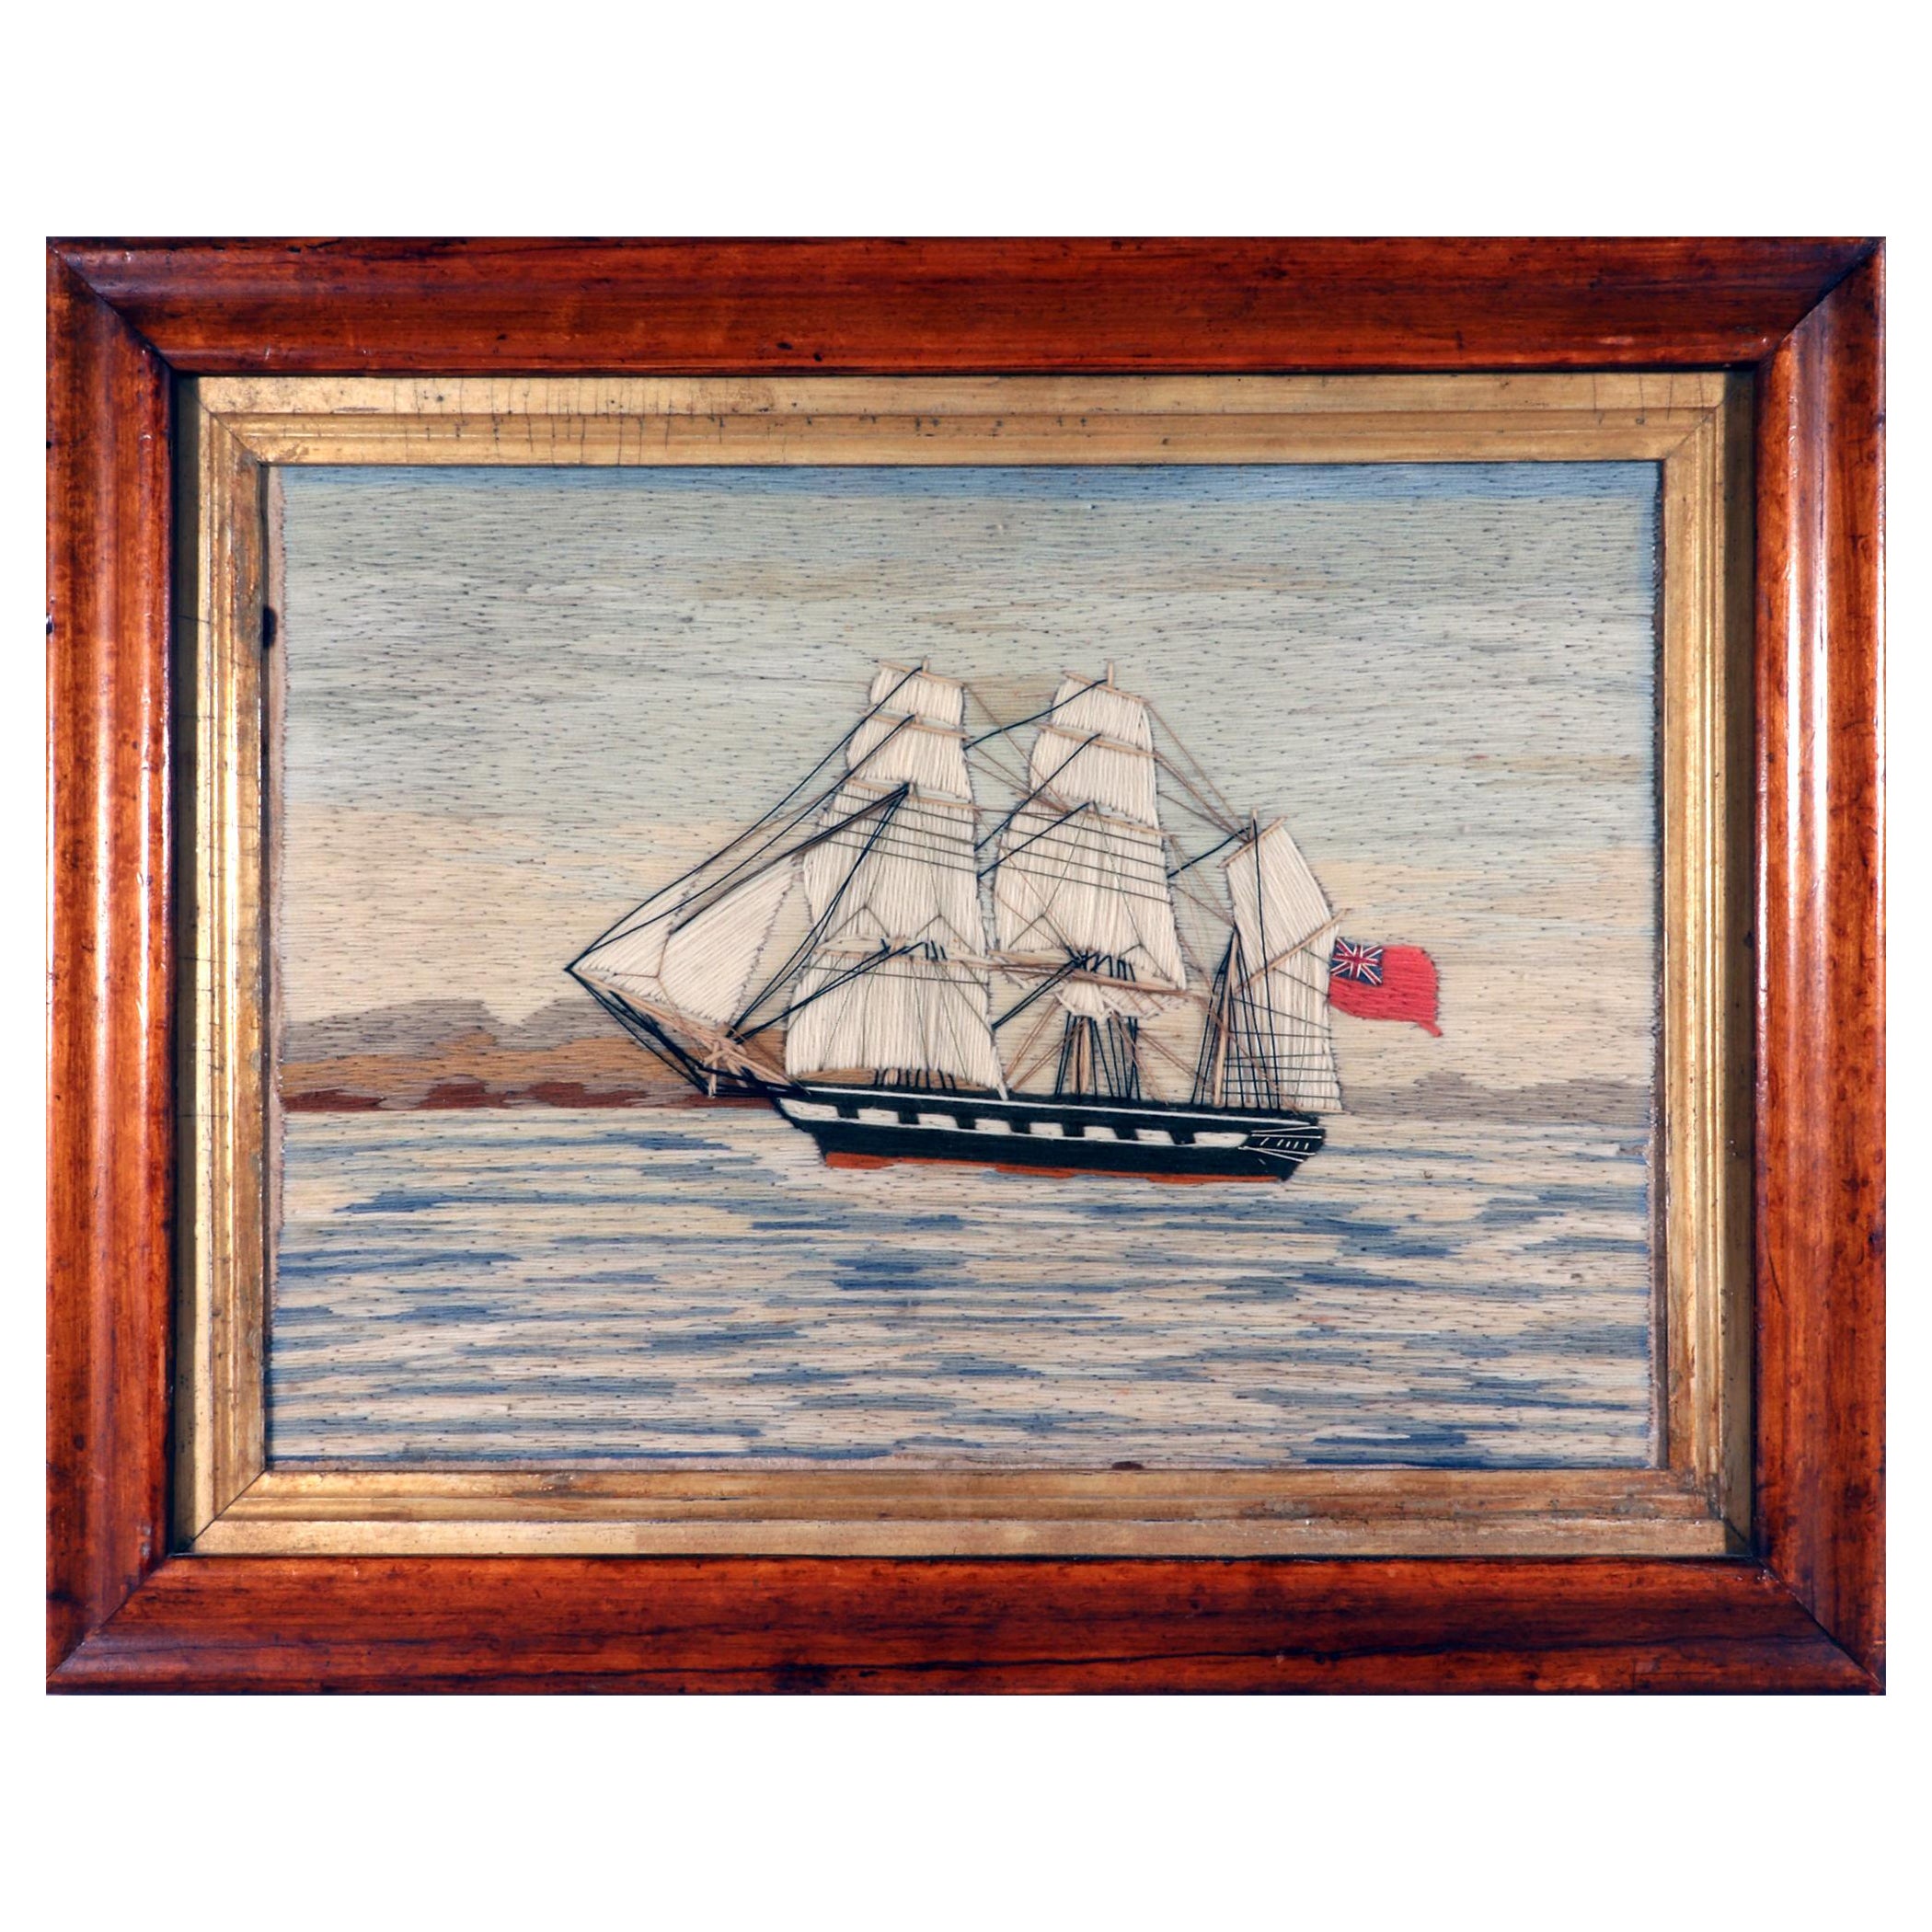 British Sailor's Woolwork of a Royal Navy Ship with Red Ensign